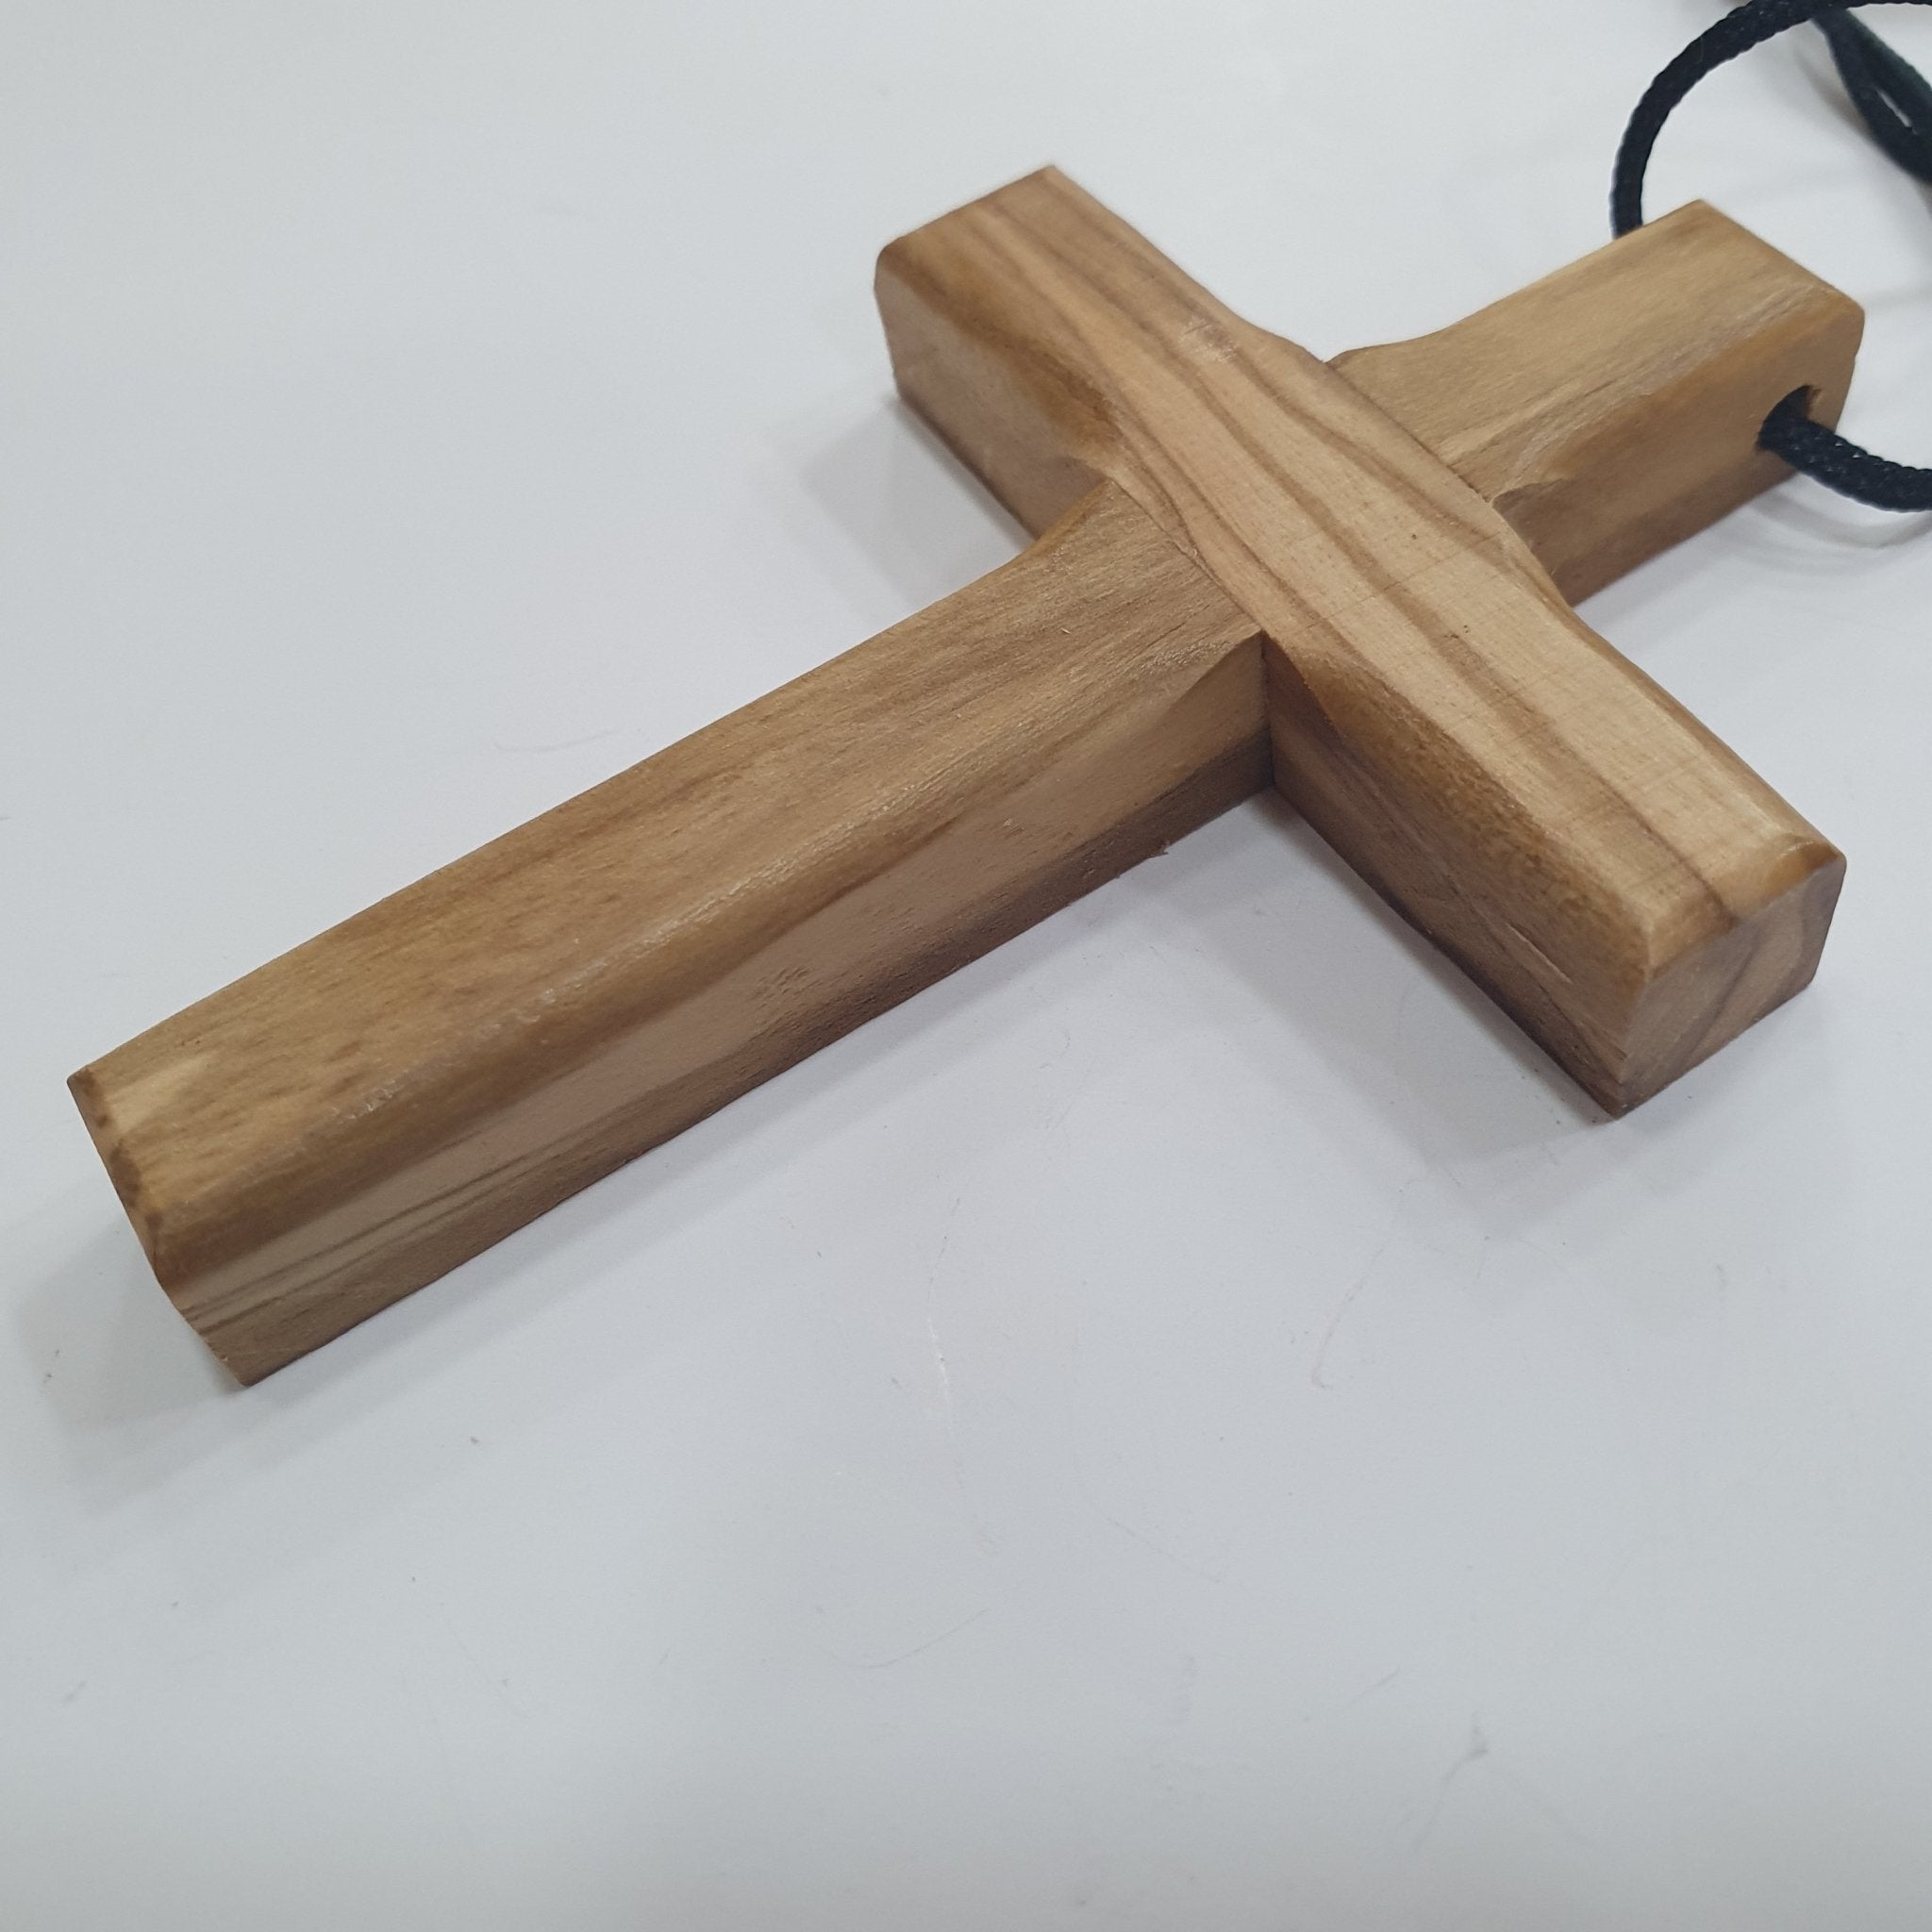 2 Hand Made Olive Wood Crosses by Zuluf PEN206 - Zuluf